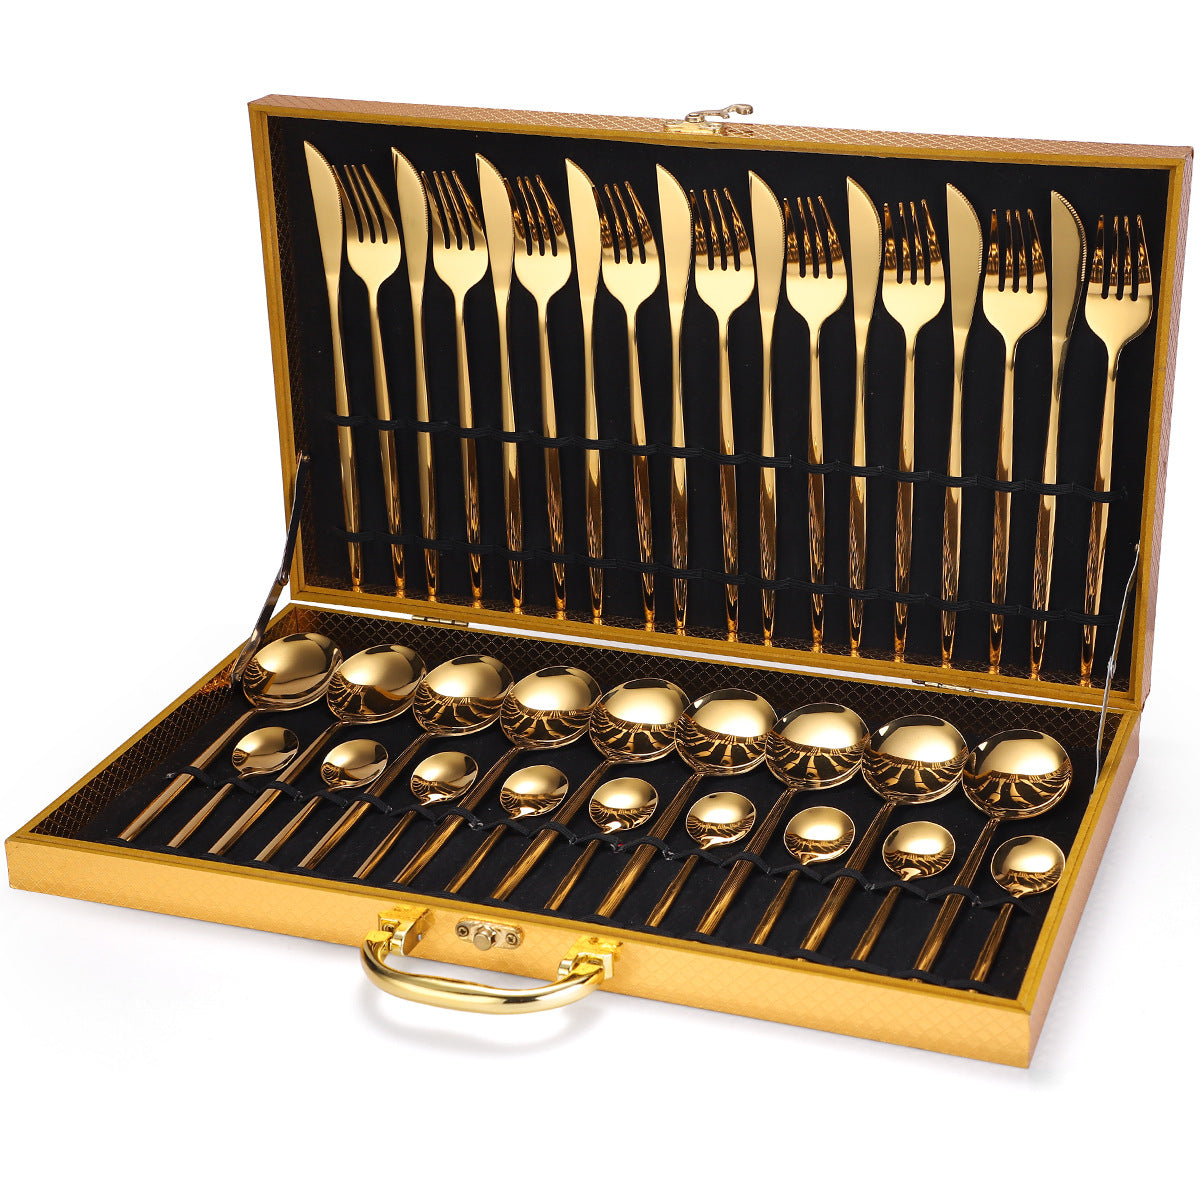 36-piece stainless steel cutlery set in a wooden box as a gift set